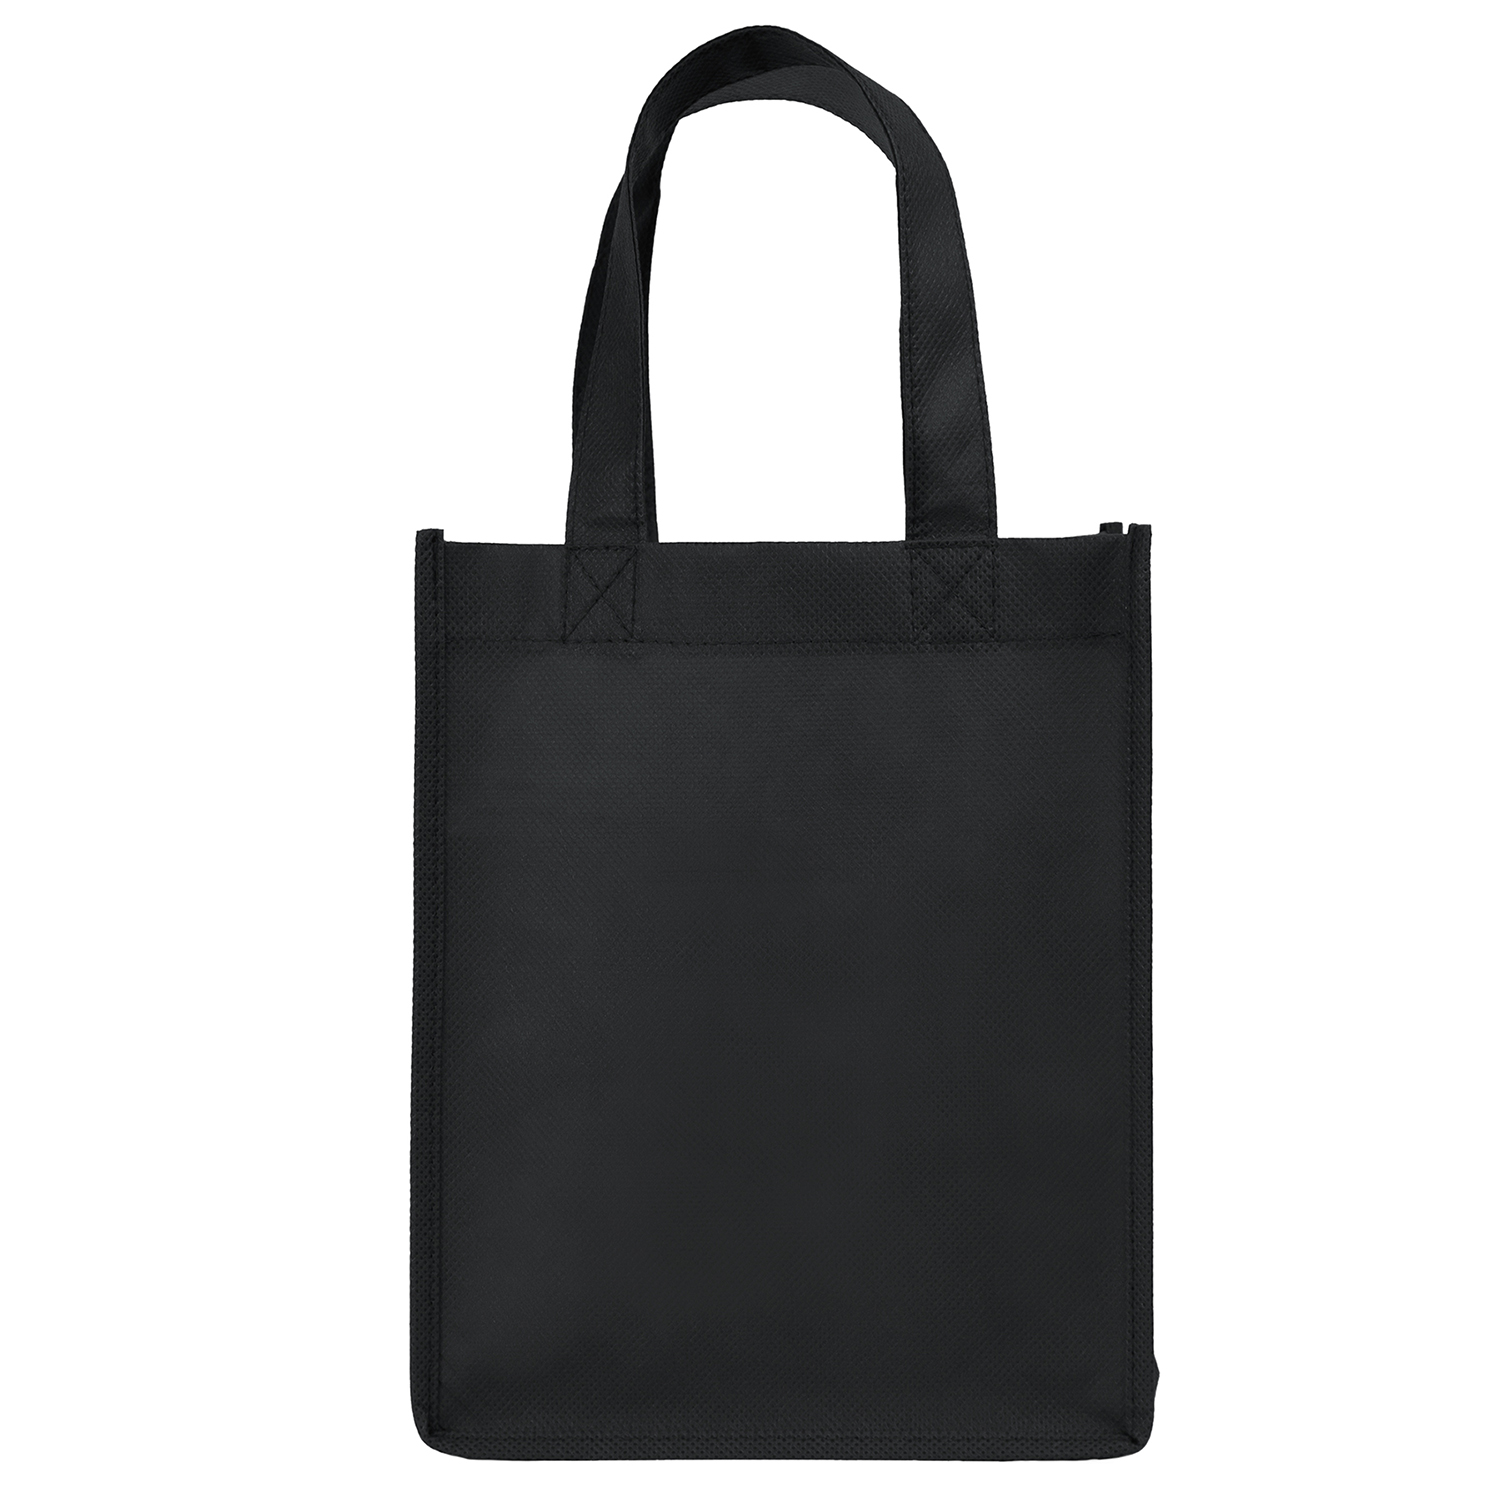 Bag Makers SPPS810 - Custom Printed Eco-Friendly Promotional Non-Woven Grocery Tote Bag